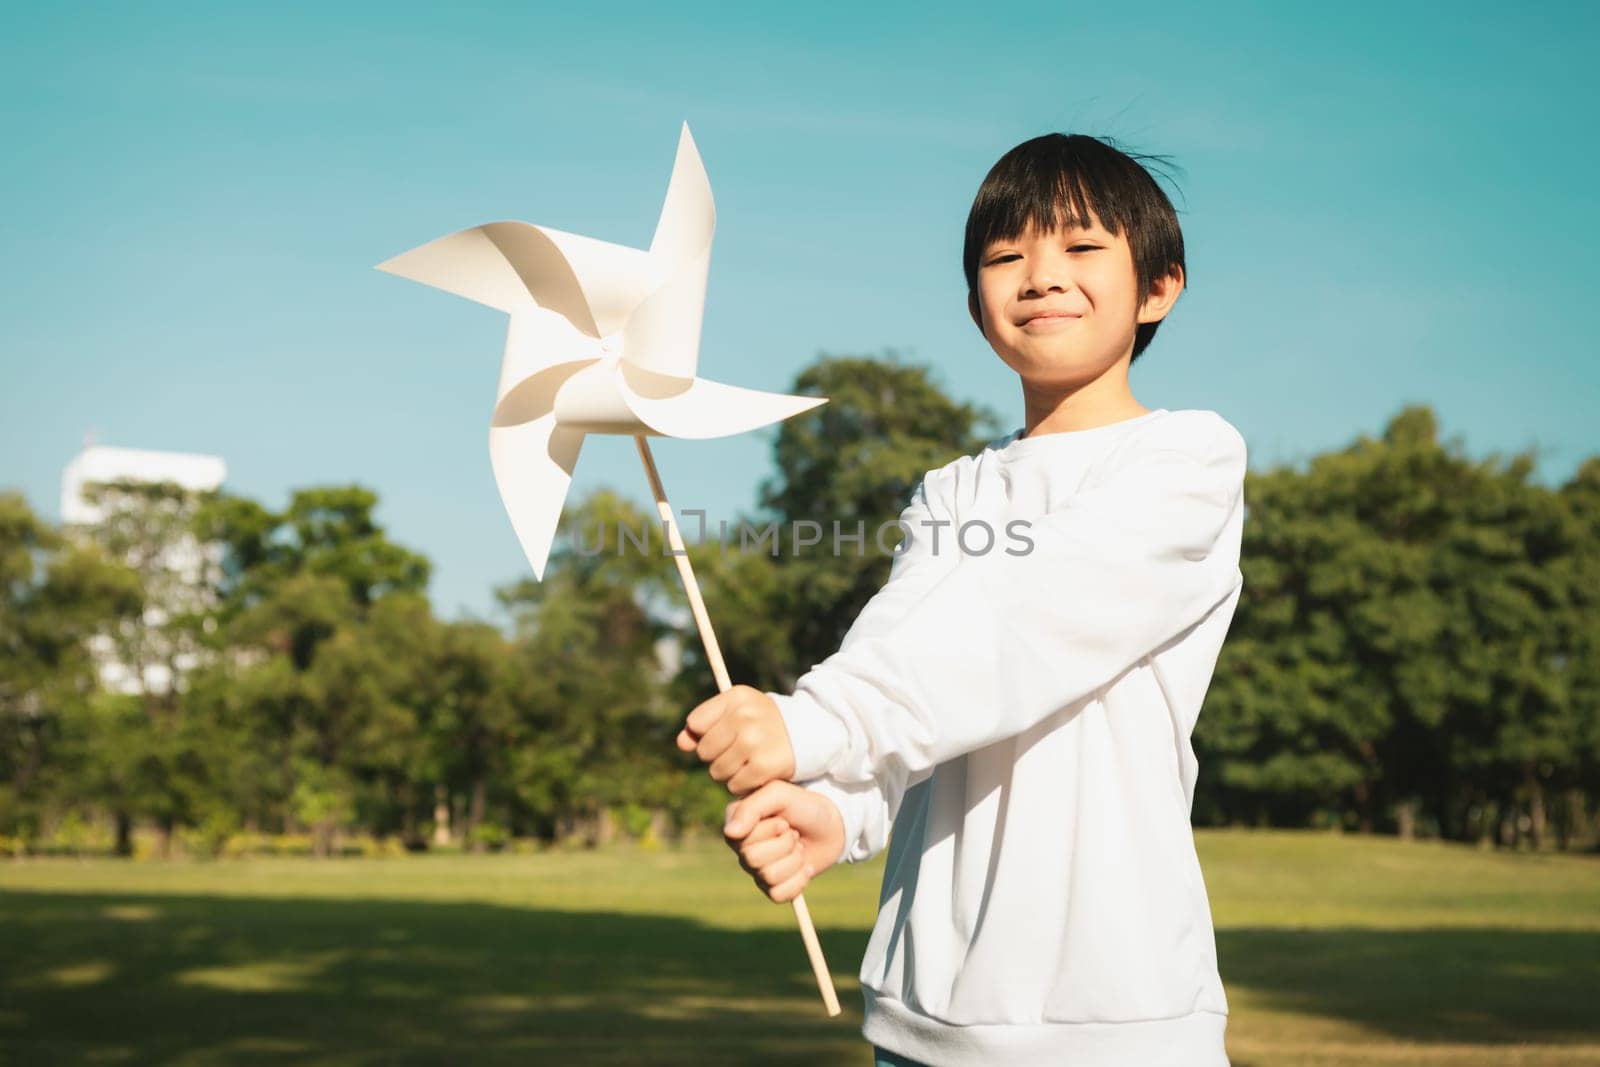 Little asian boy holding windmill or wind turbine mockup model to promote eco clean and renewable energy technology utilization for future generation and sustainable Earth. Gyre